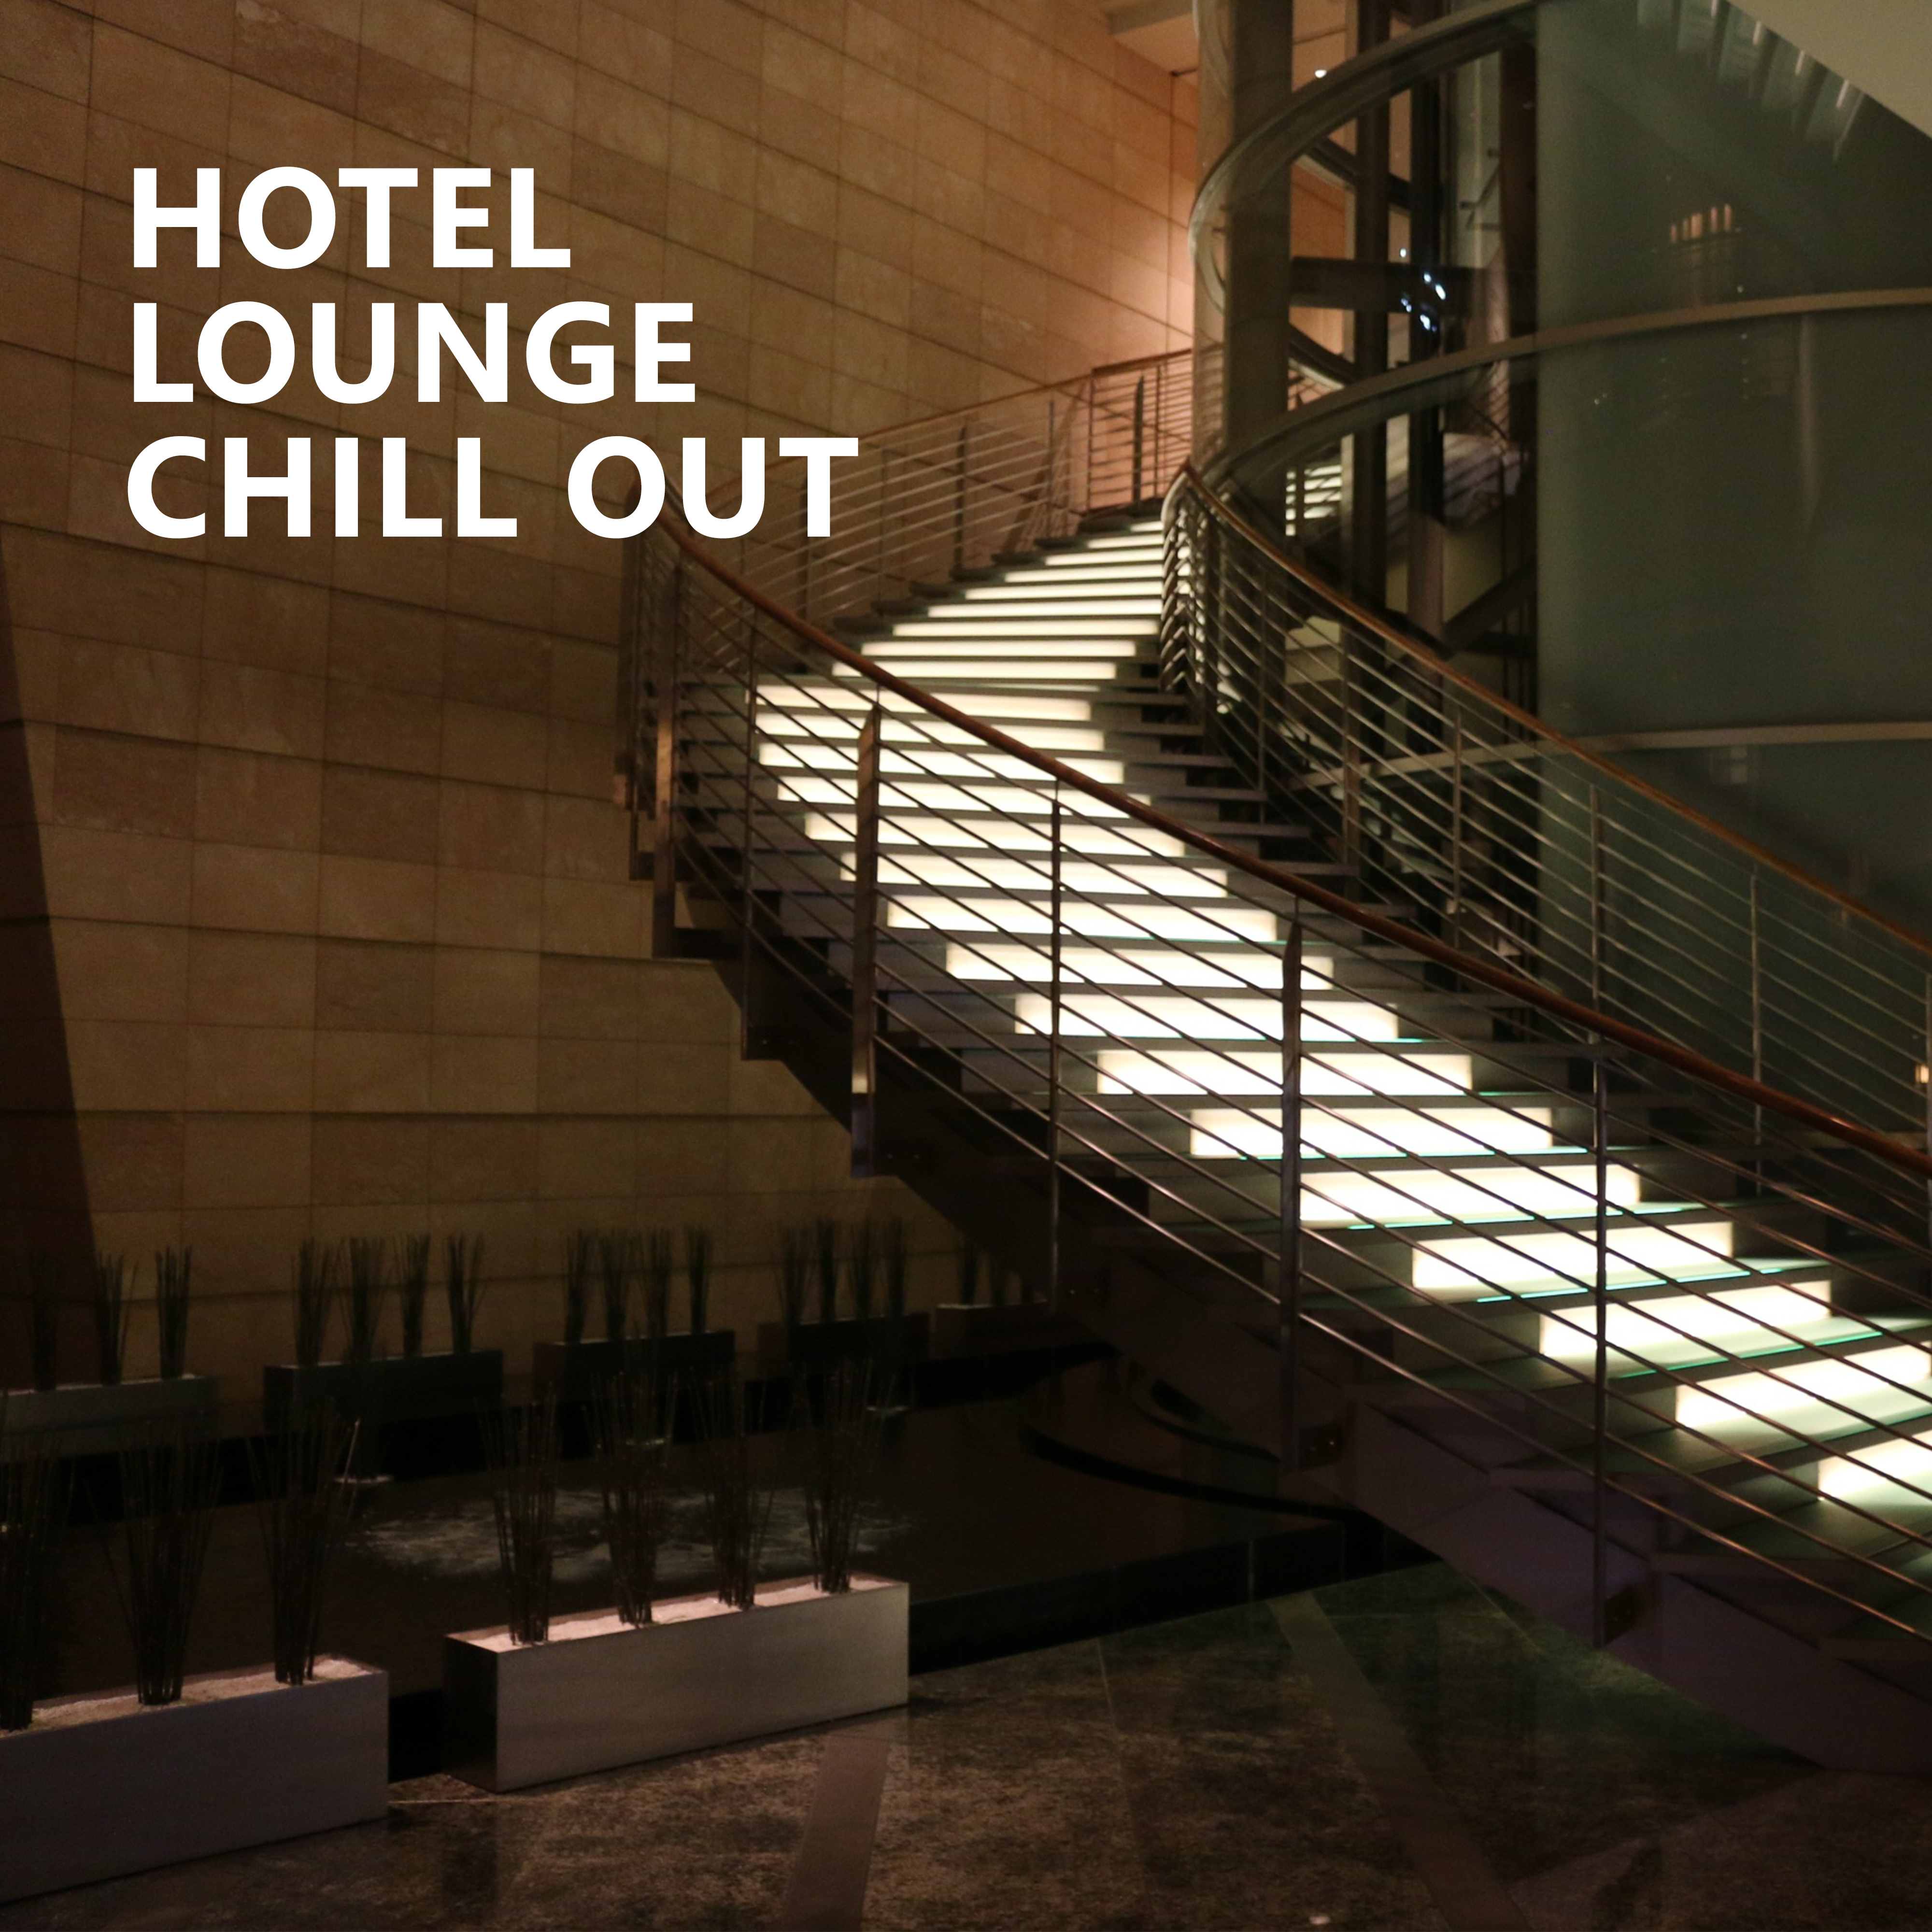 Hotel Lounge Chill Out  Easy Listening, Stress Relief, Chill Out Music, Holiday Journey, Peaceful Vibes